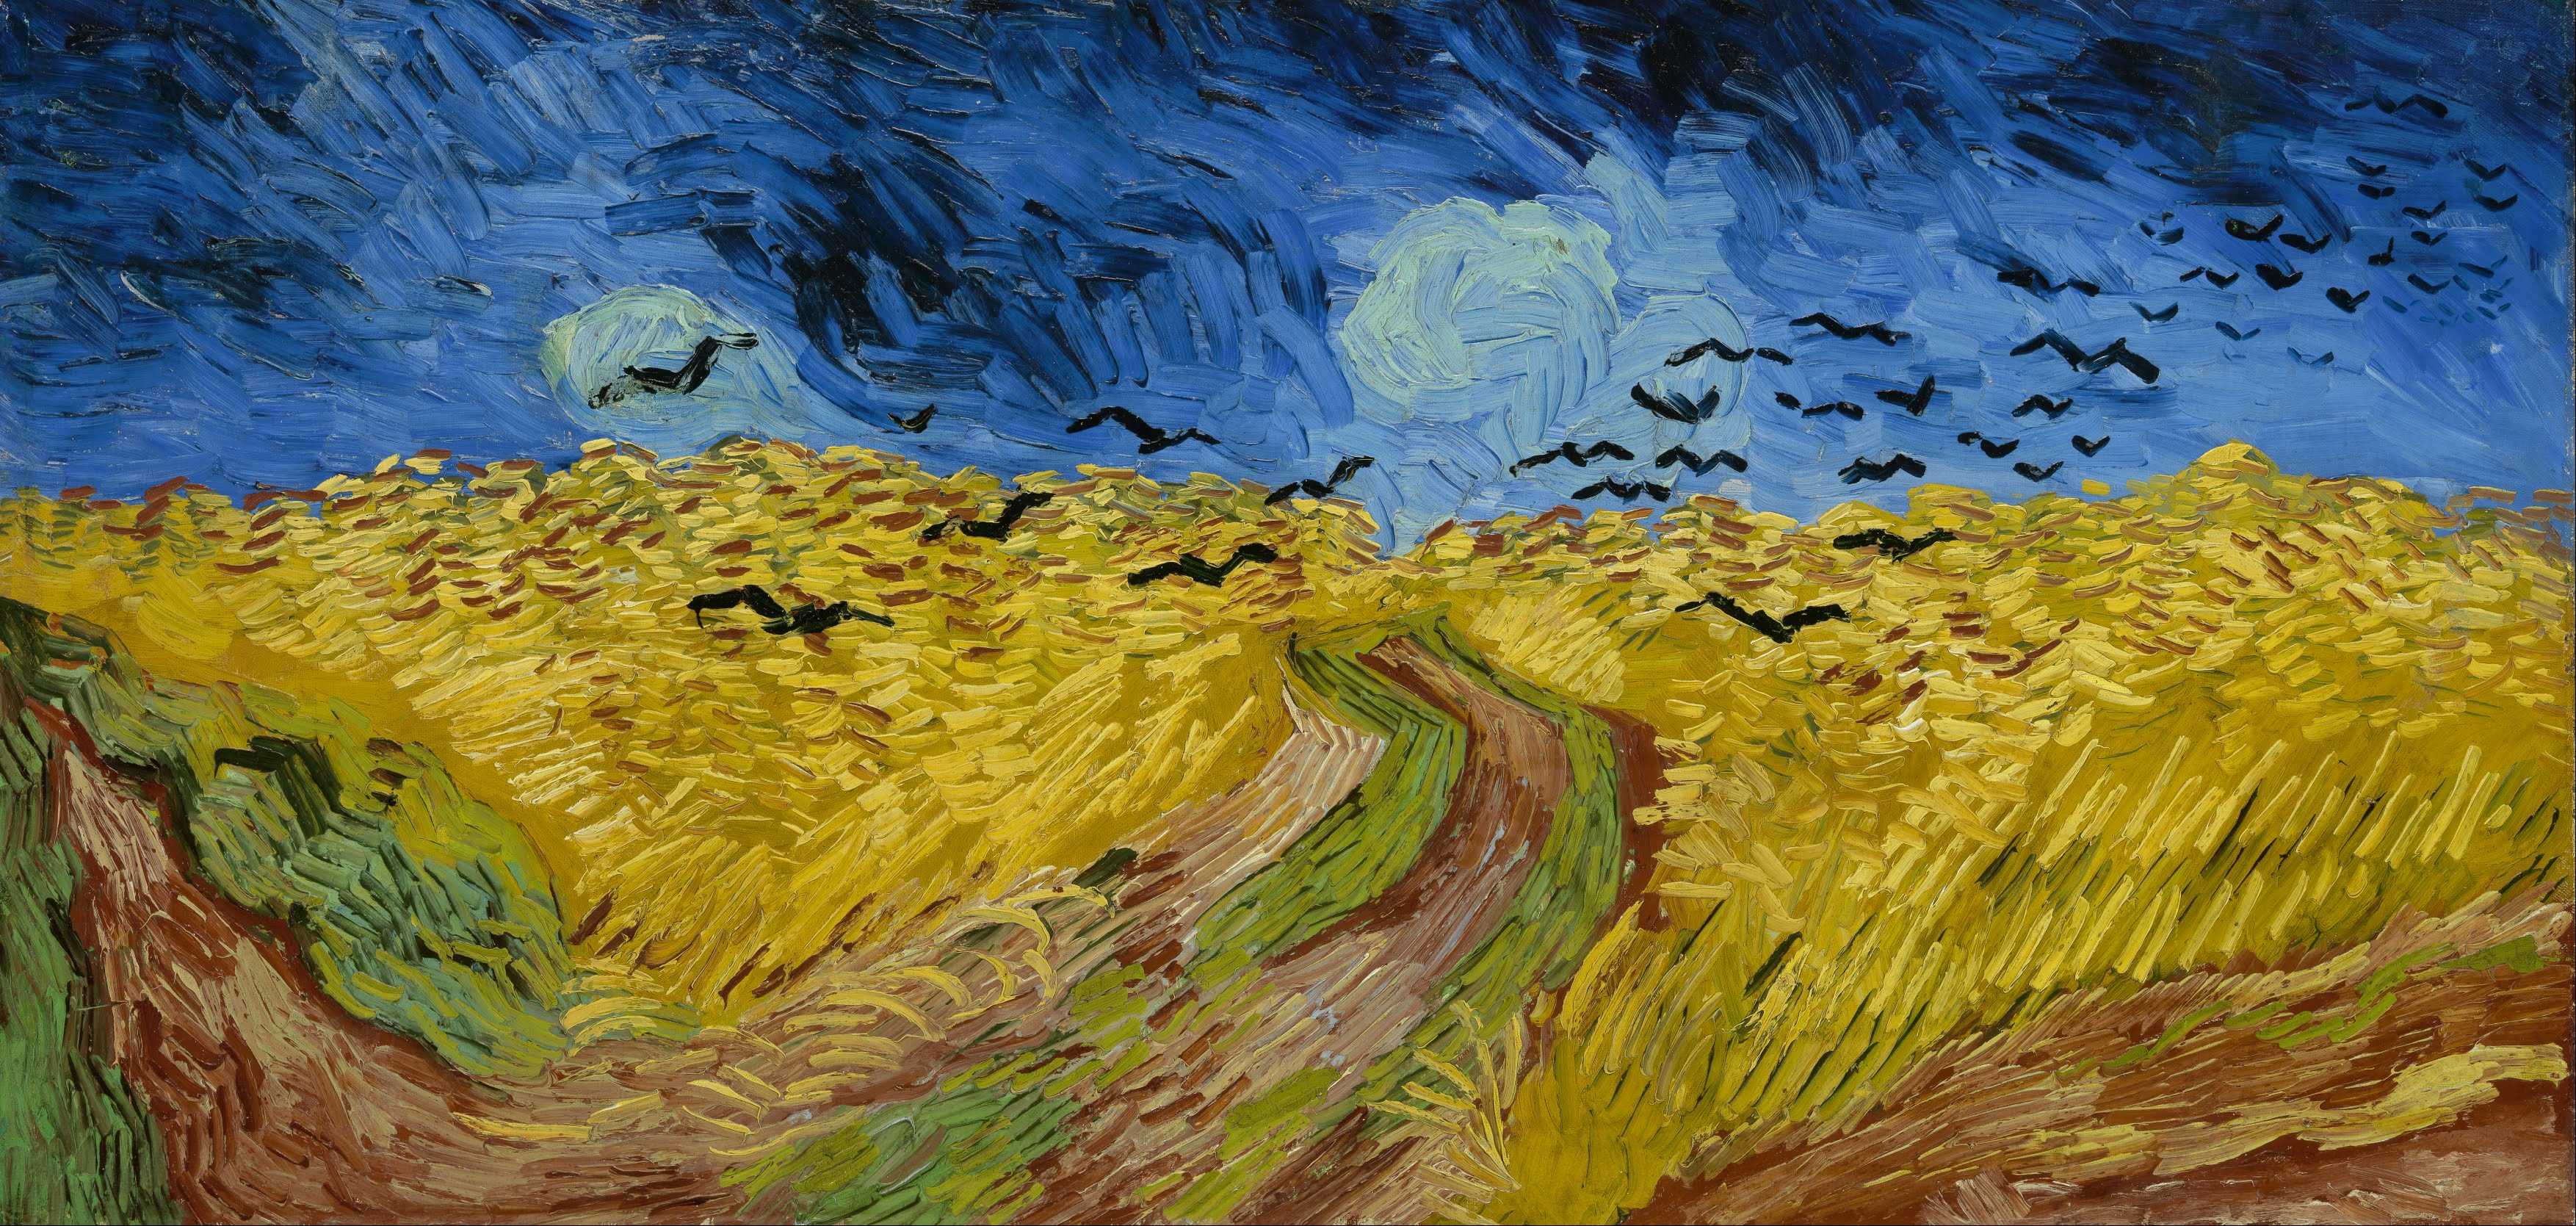 Find out more about Vincent van Gogh - Wheatfield with crows